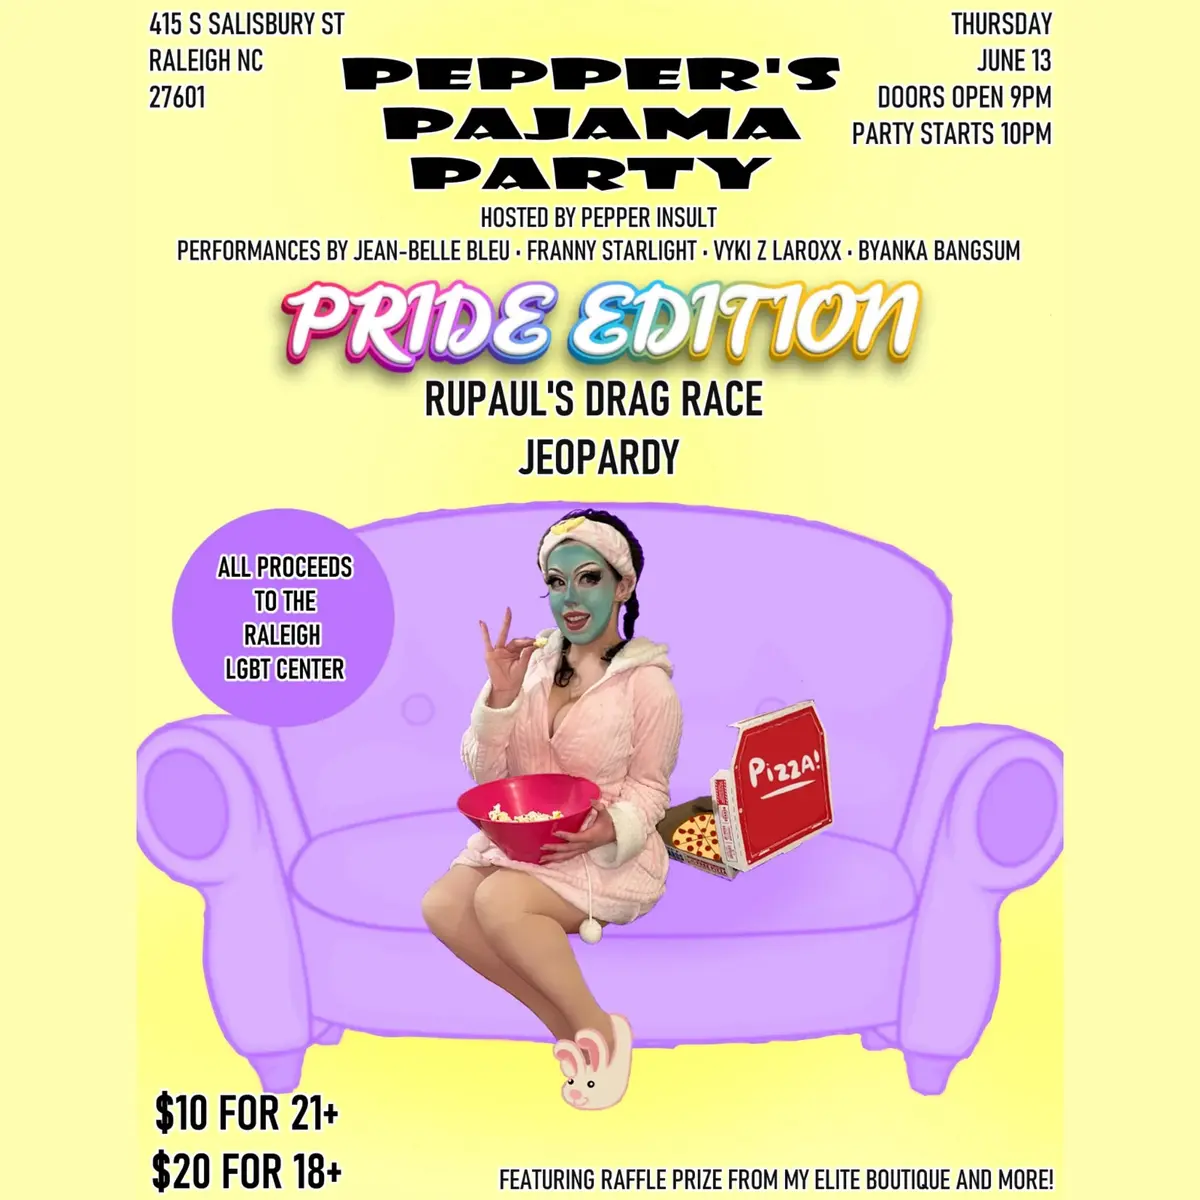 Pepper's Pajama Party: Pride Edition! With Rupaul's Drag Race Jeopardy!